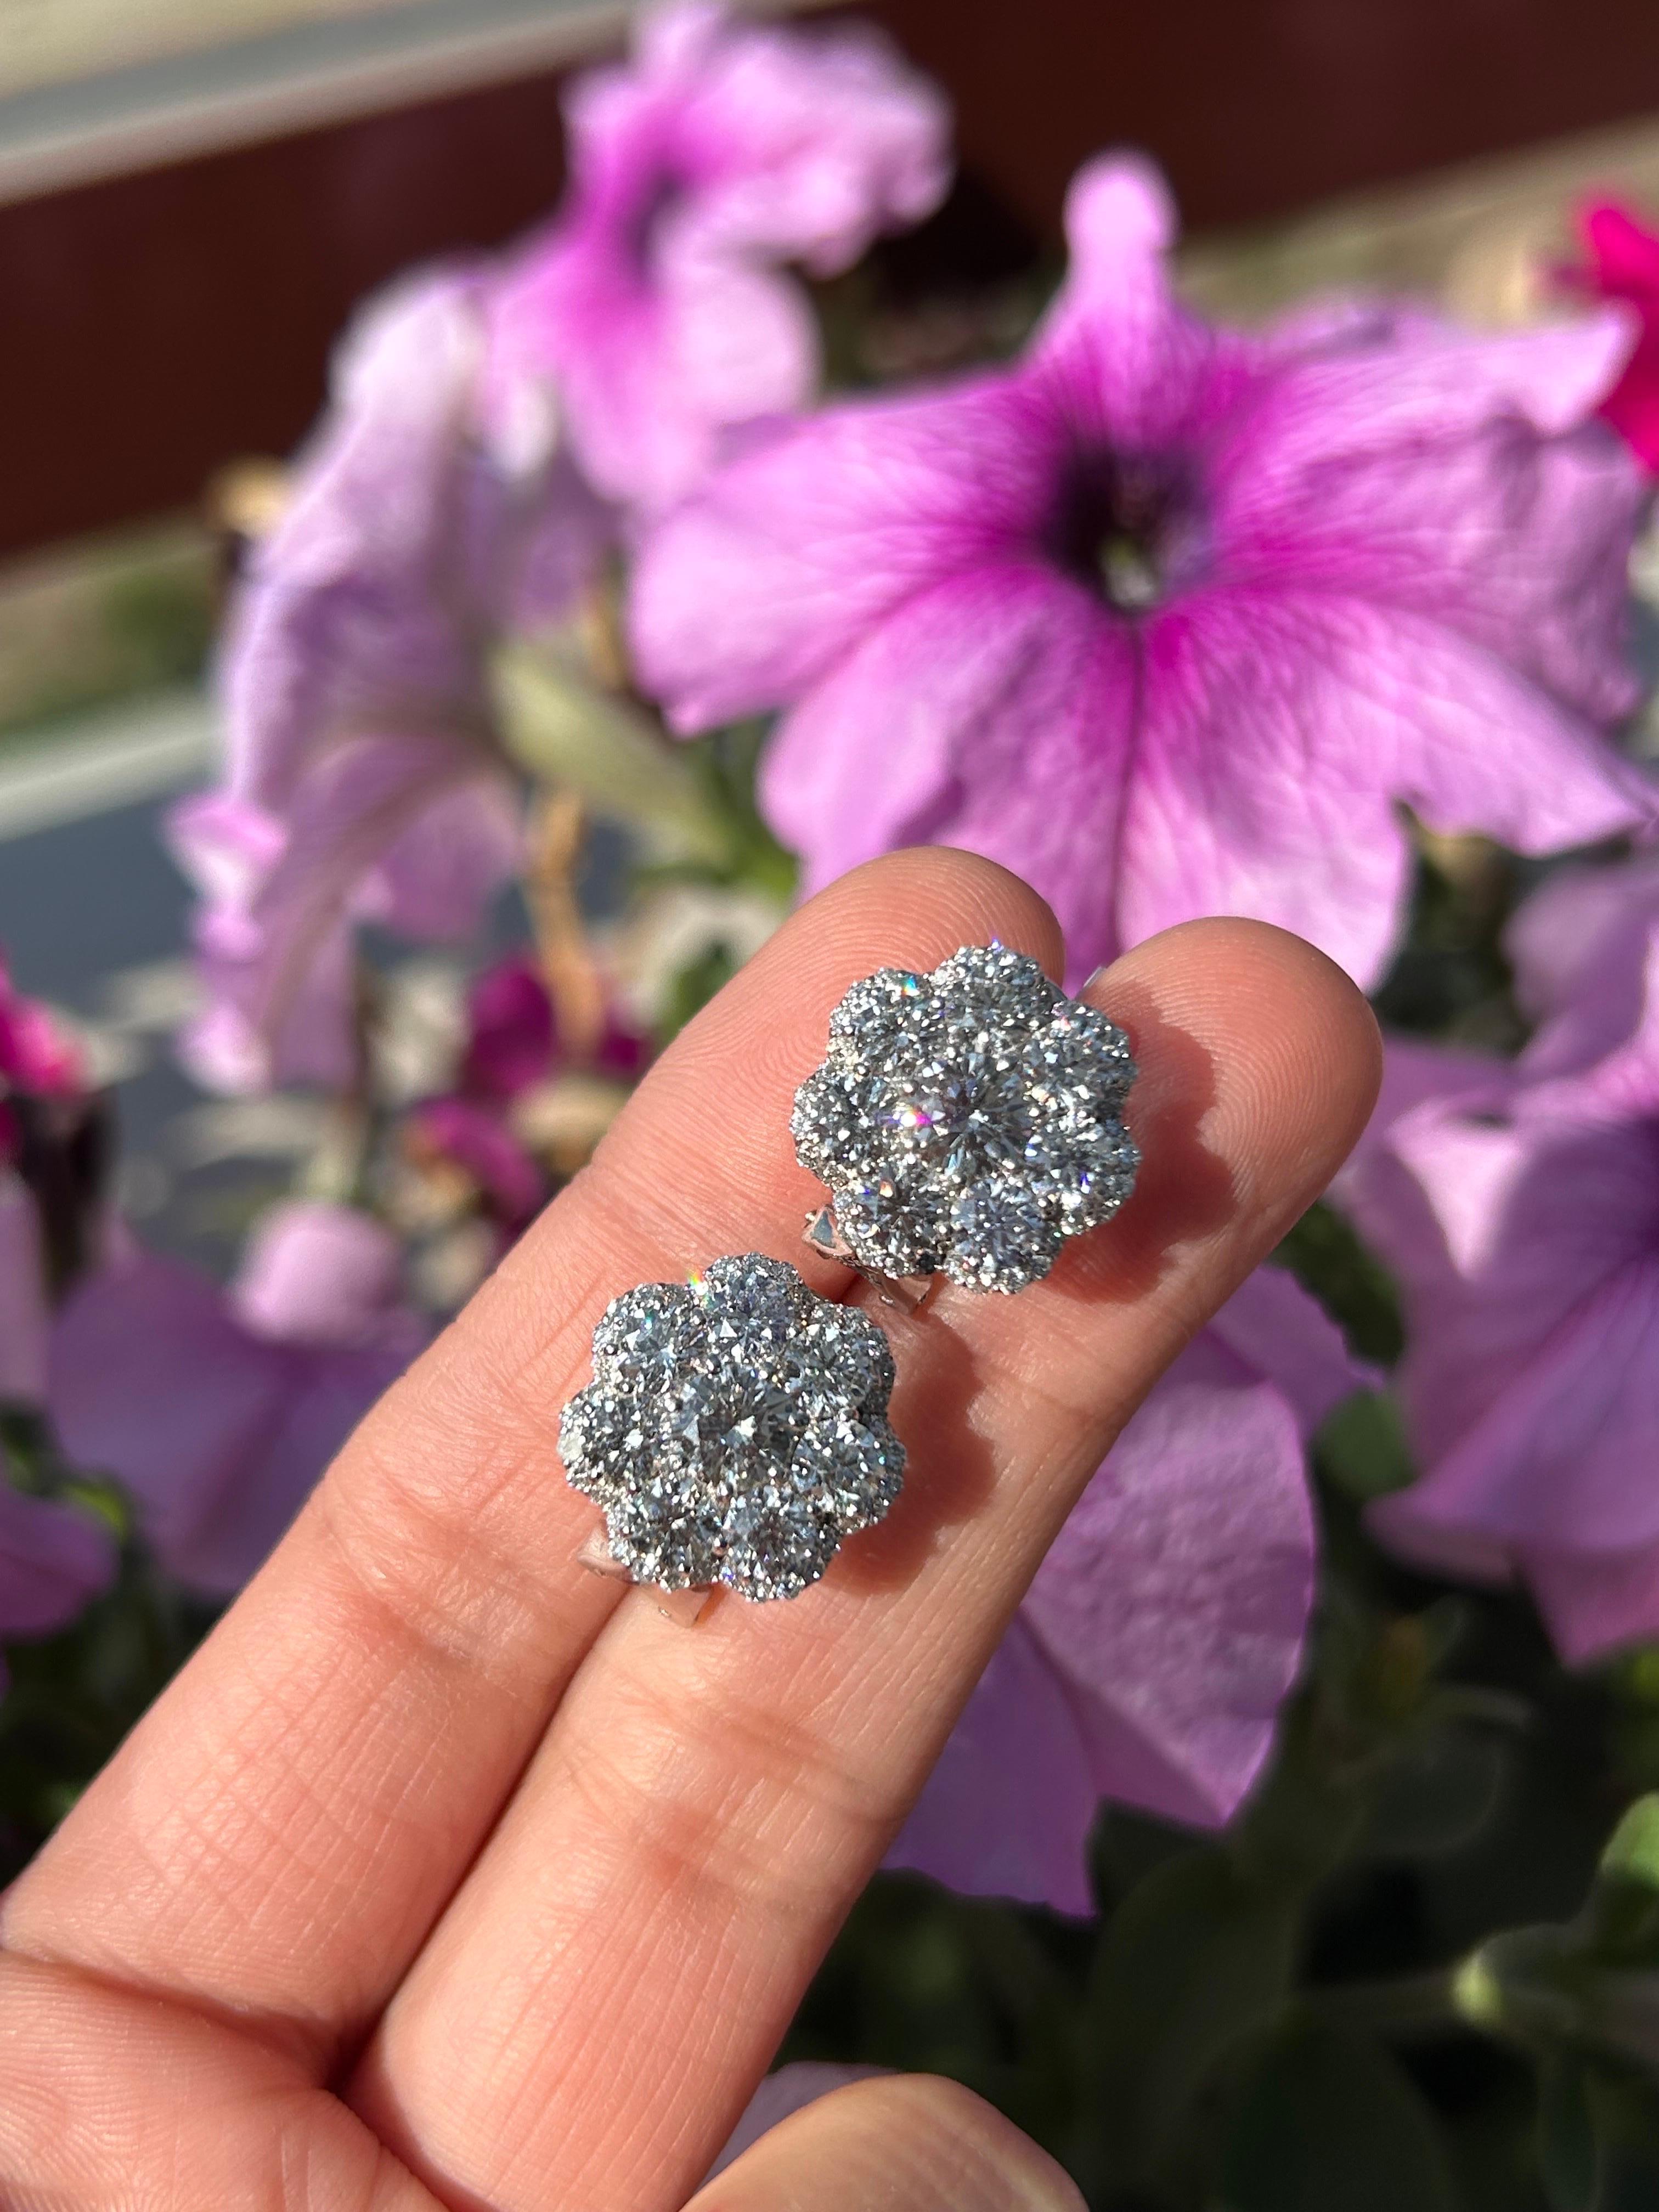 A classic pair of beautifully handcrafted 5.71 carat Diamond studs, with center 50pointer diamonds and 30pointer diamonds surrounding it. The 5.15 carat larger diamonds are VVS quality, G/H color, and the smaller 0.56 carat diamonds are F/G color,